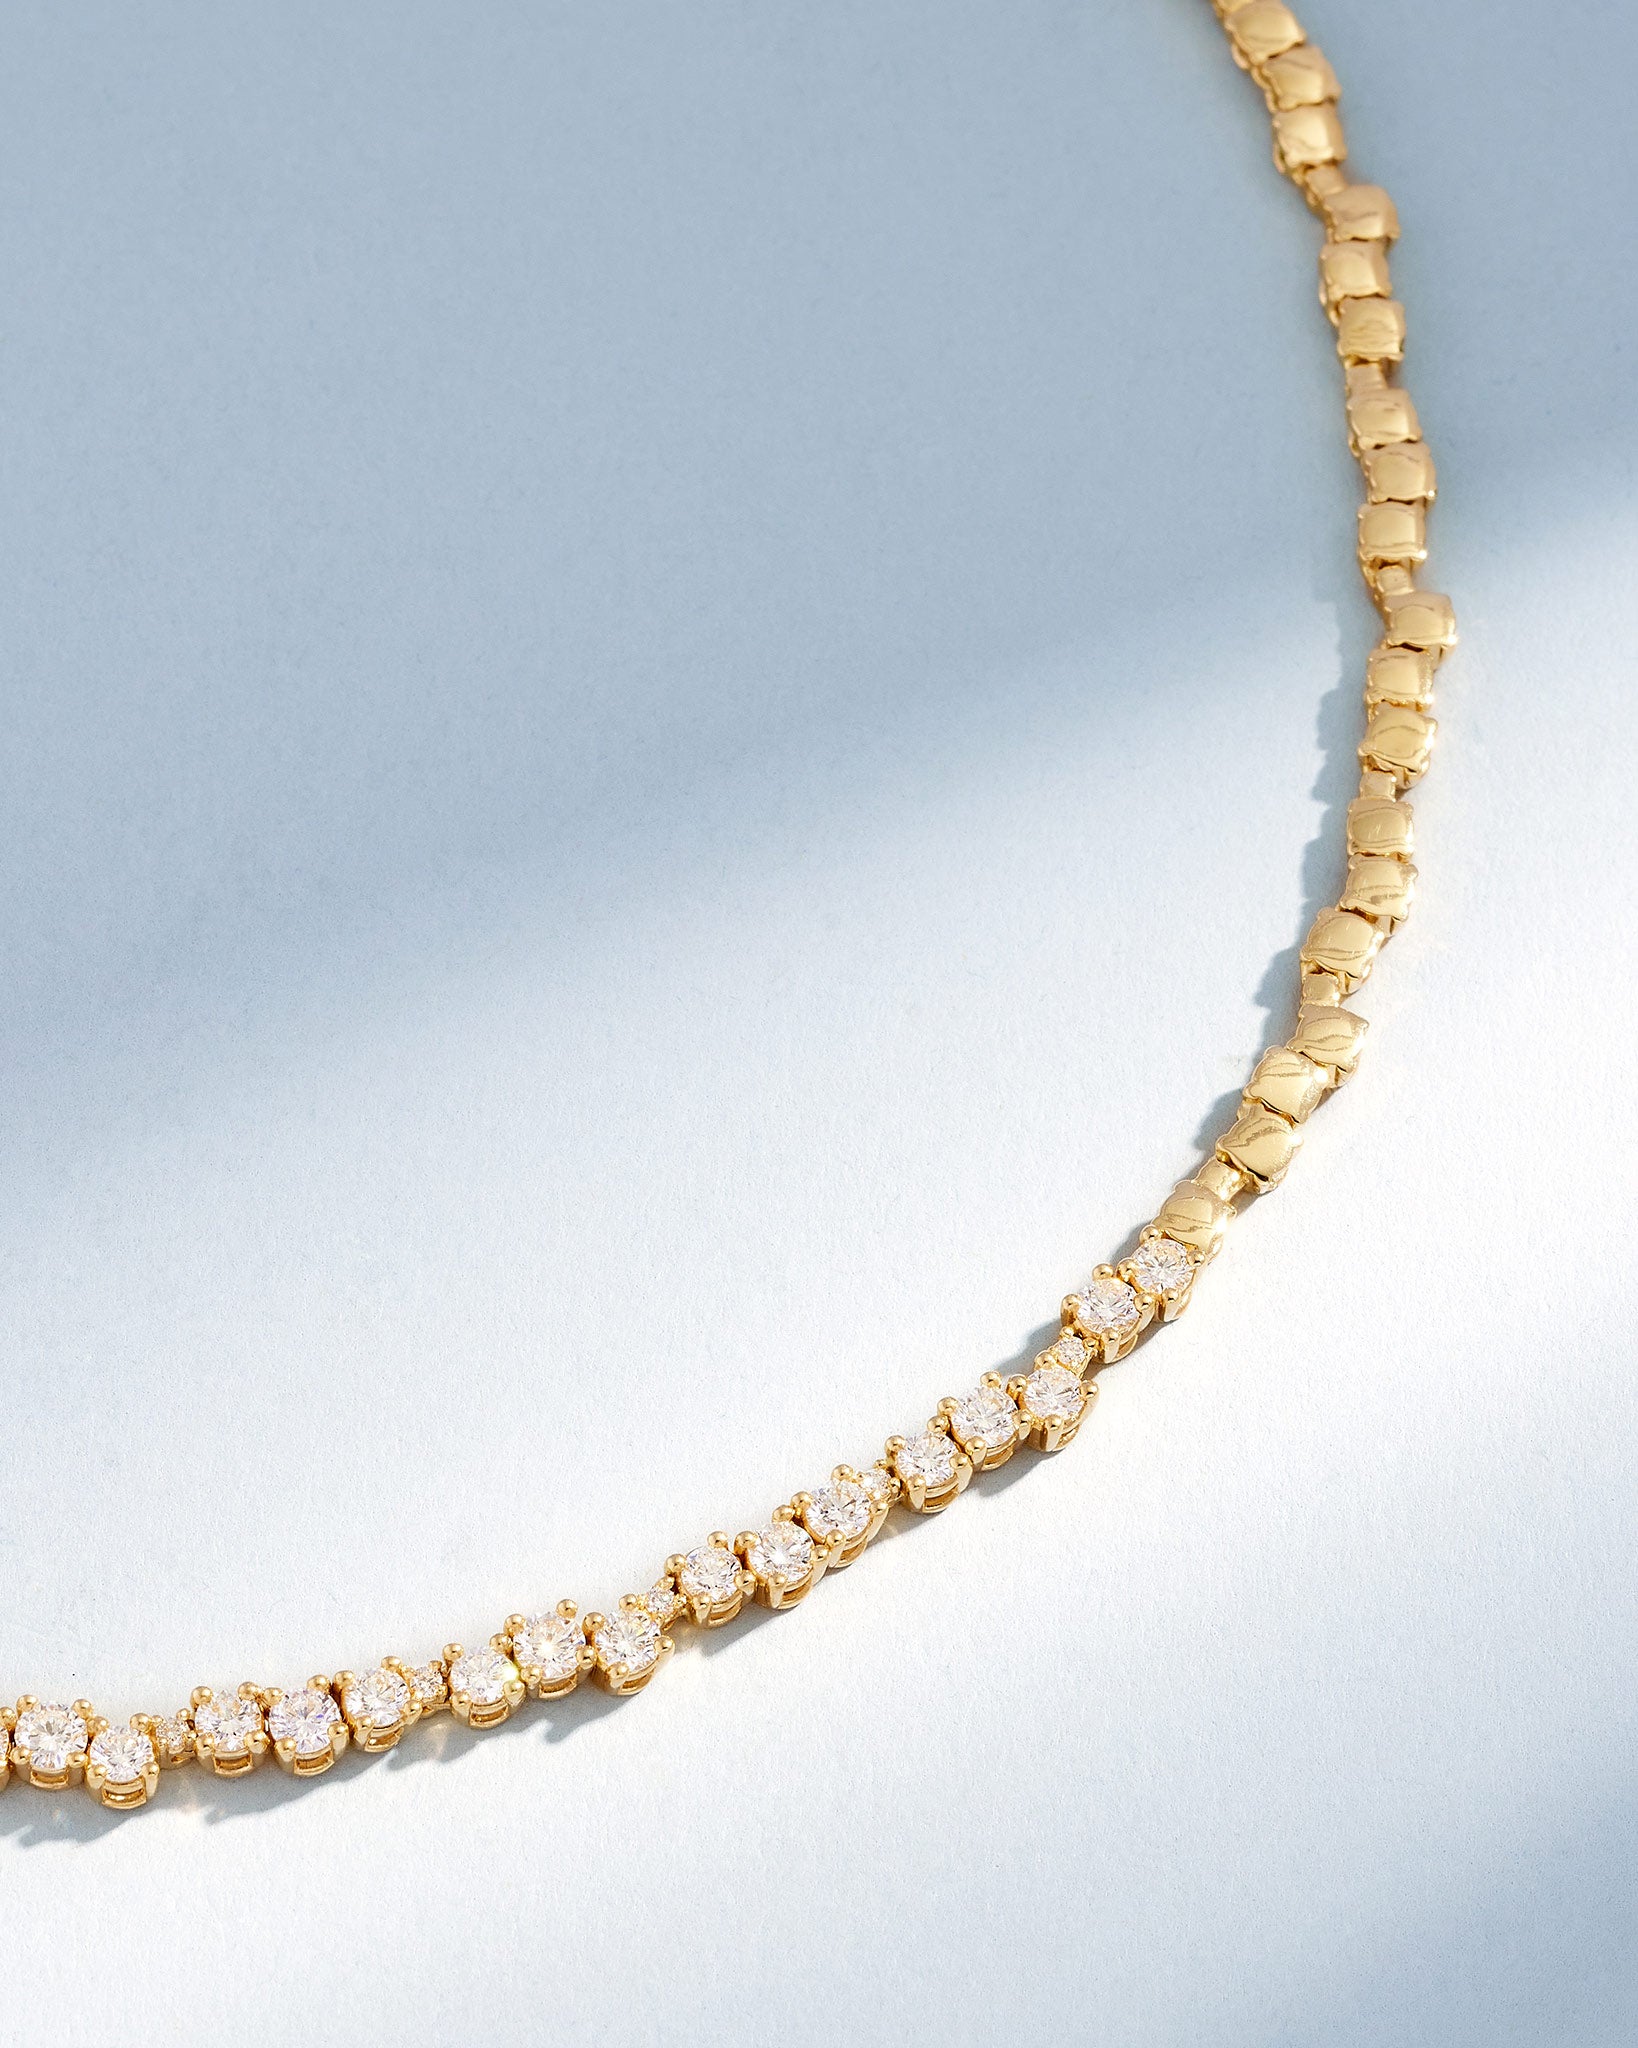 Suzanne Kalan Classic Diamond Round Tennis Necklace in 18k yellow gold